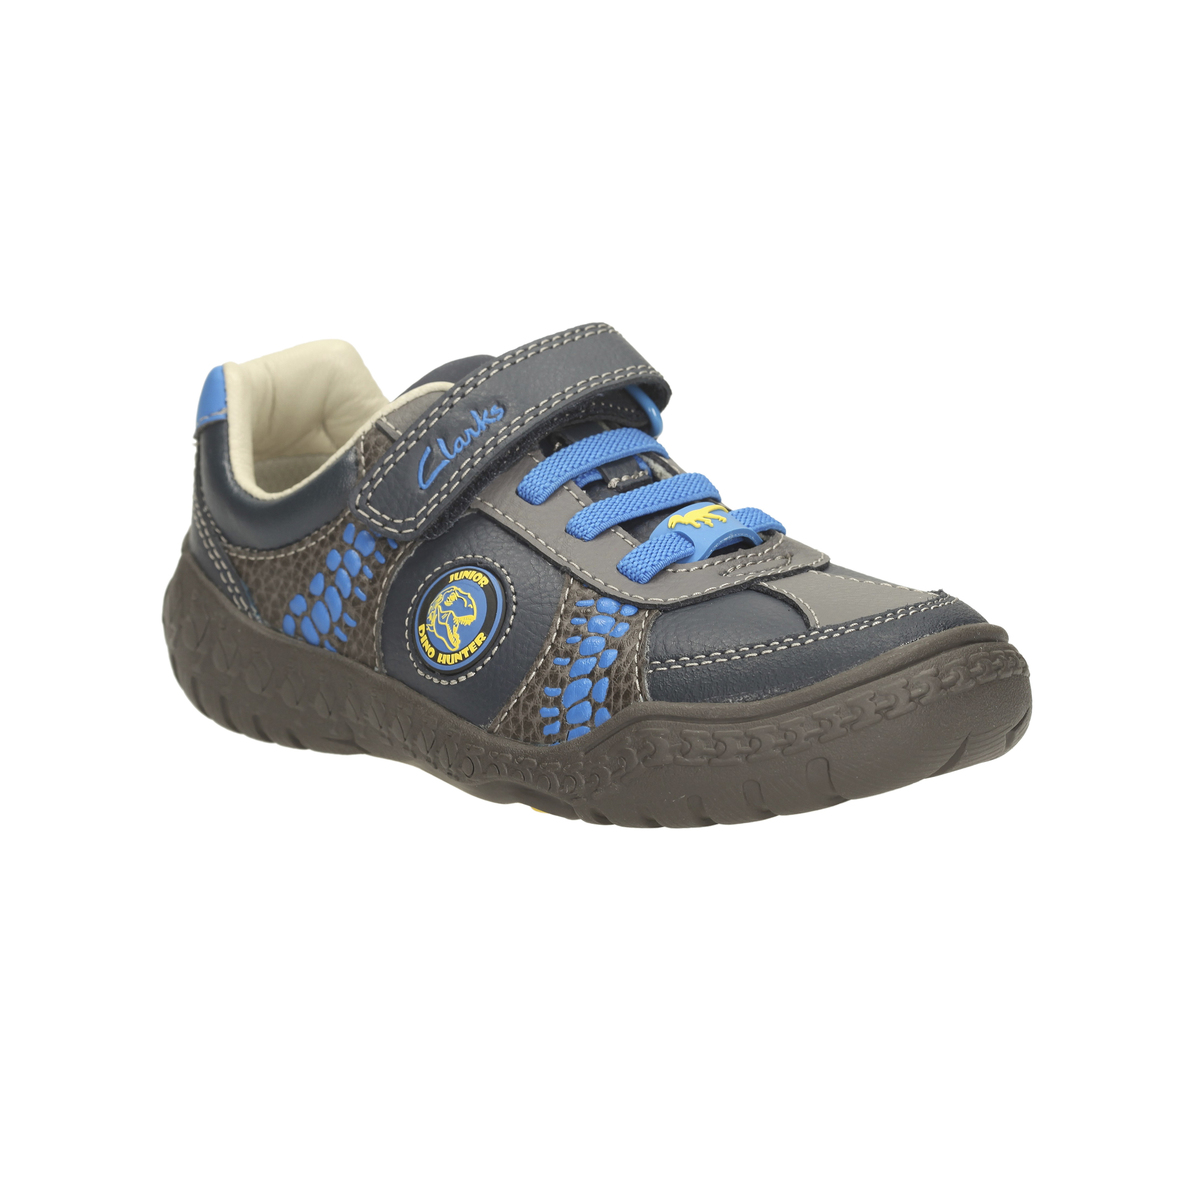 Clarks Stomp Roll Shoes - Footsteps - Children's Shoes